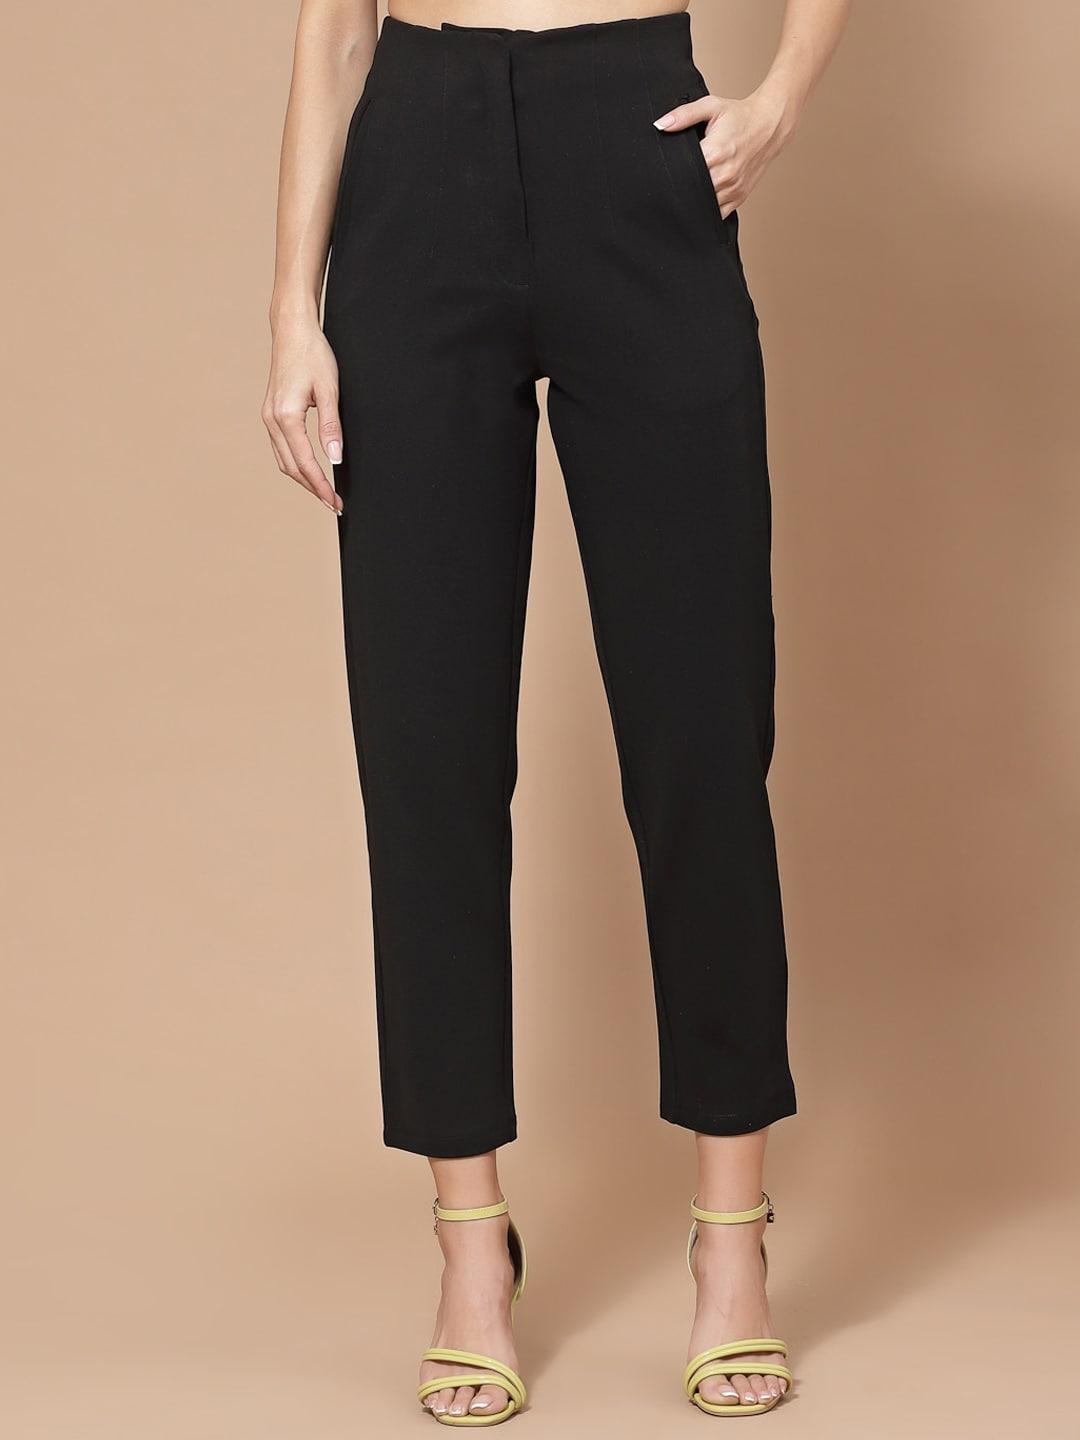 KASSUALLY Women Mid-Rise Cigarette Trousers